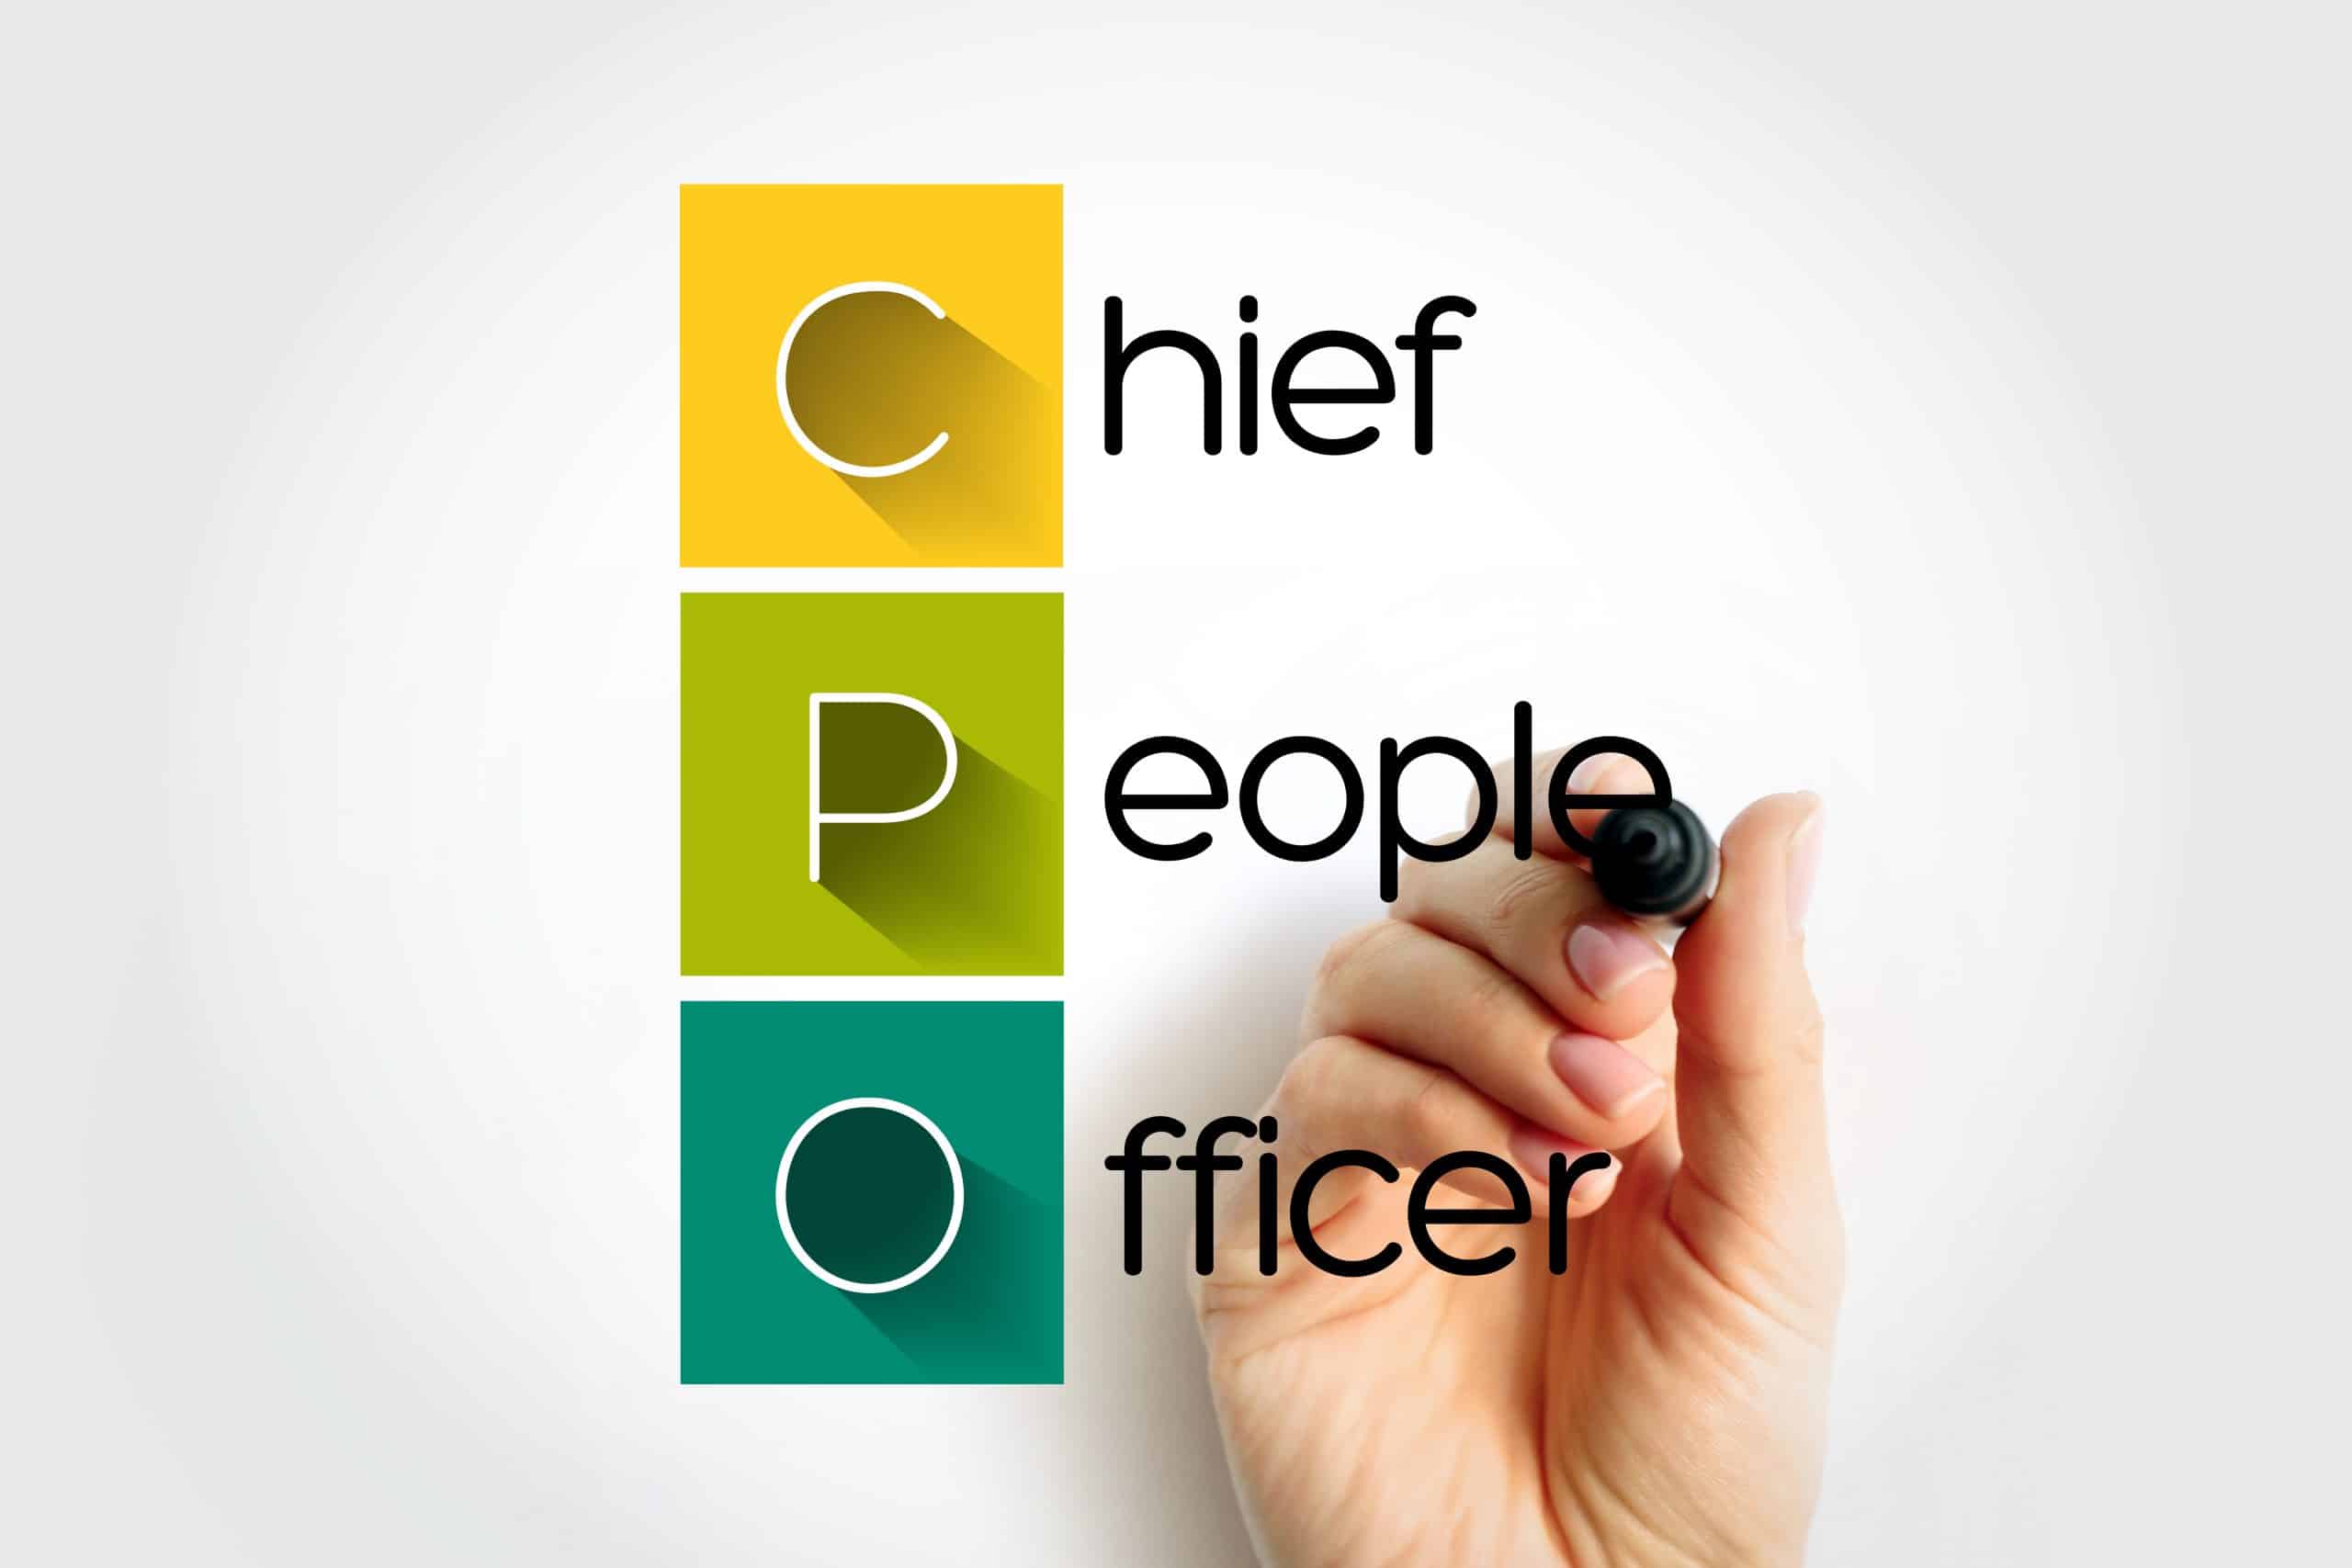 ractional CHRO CPO HR consulting firm